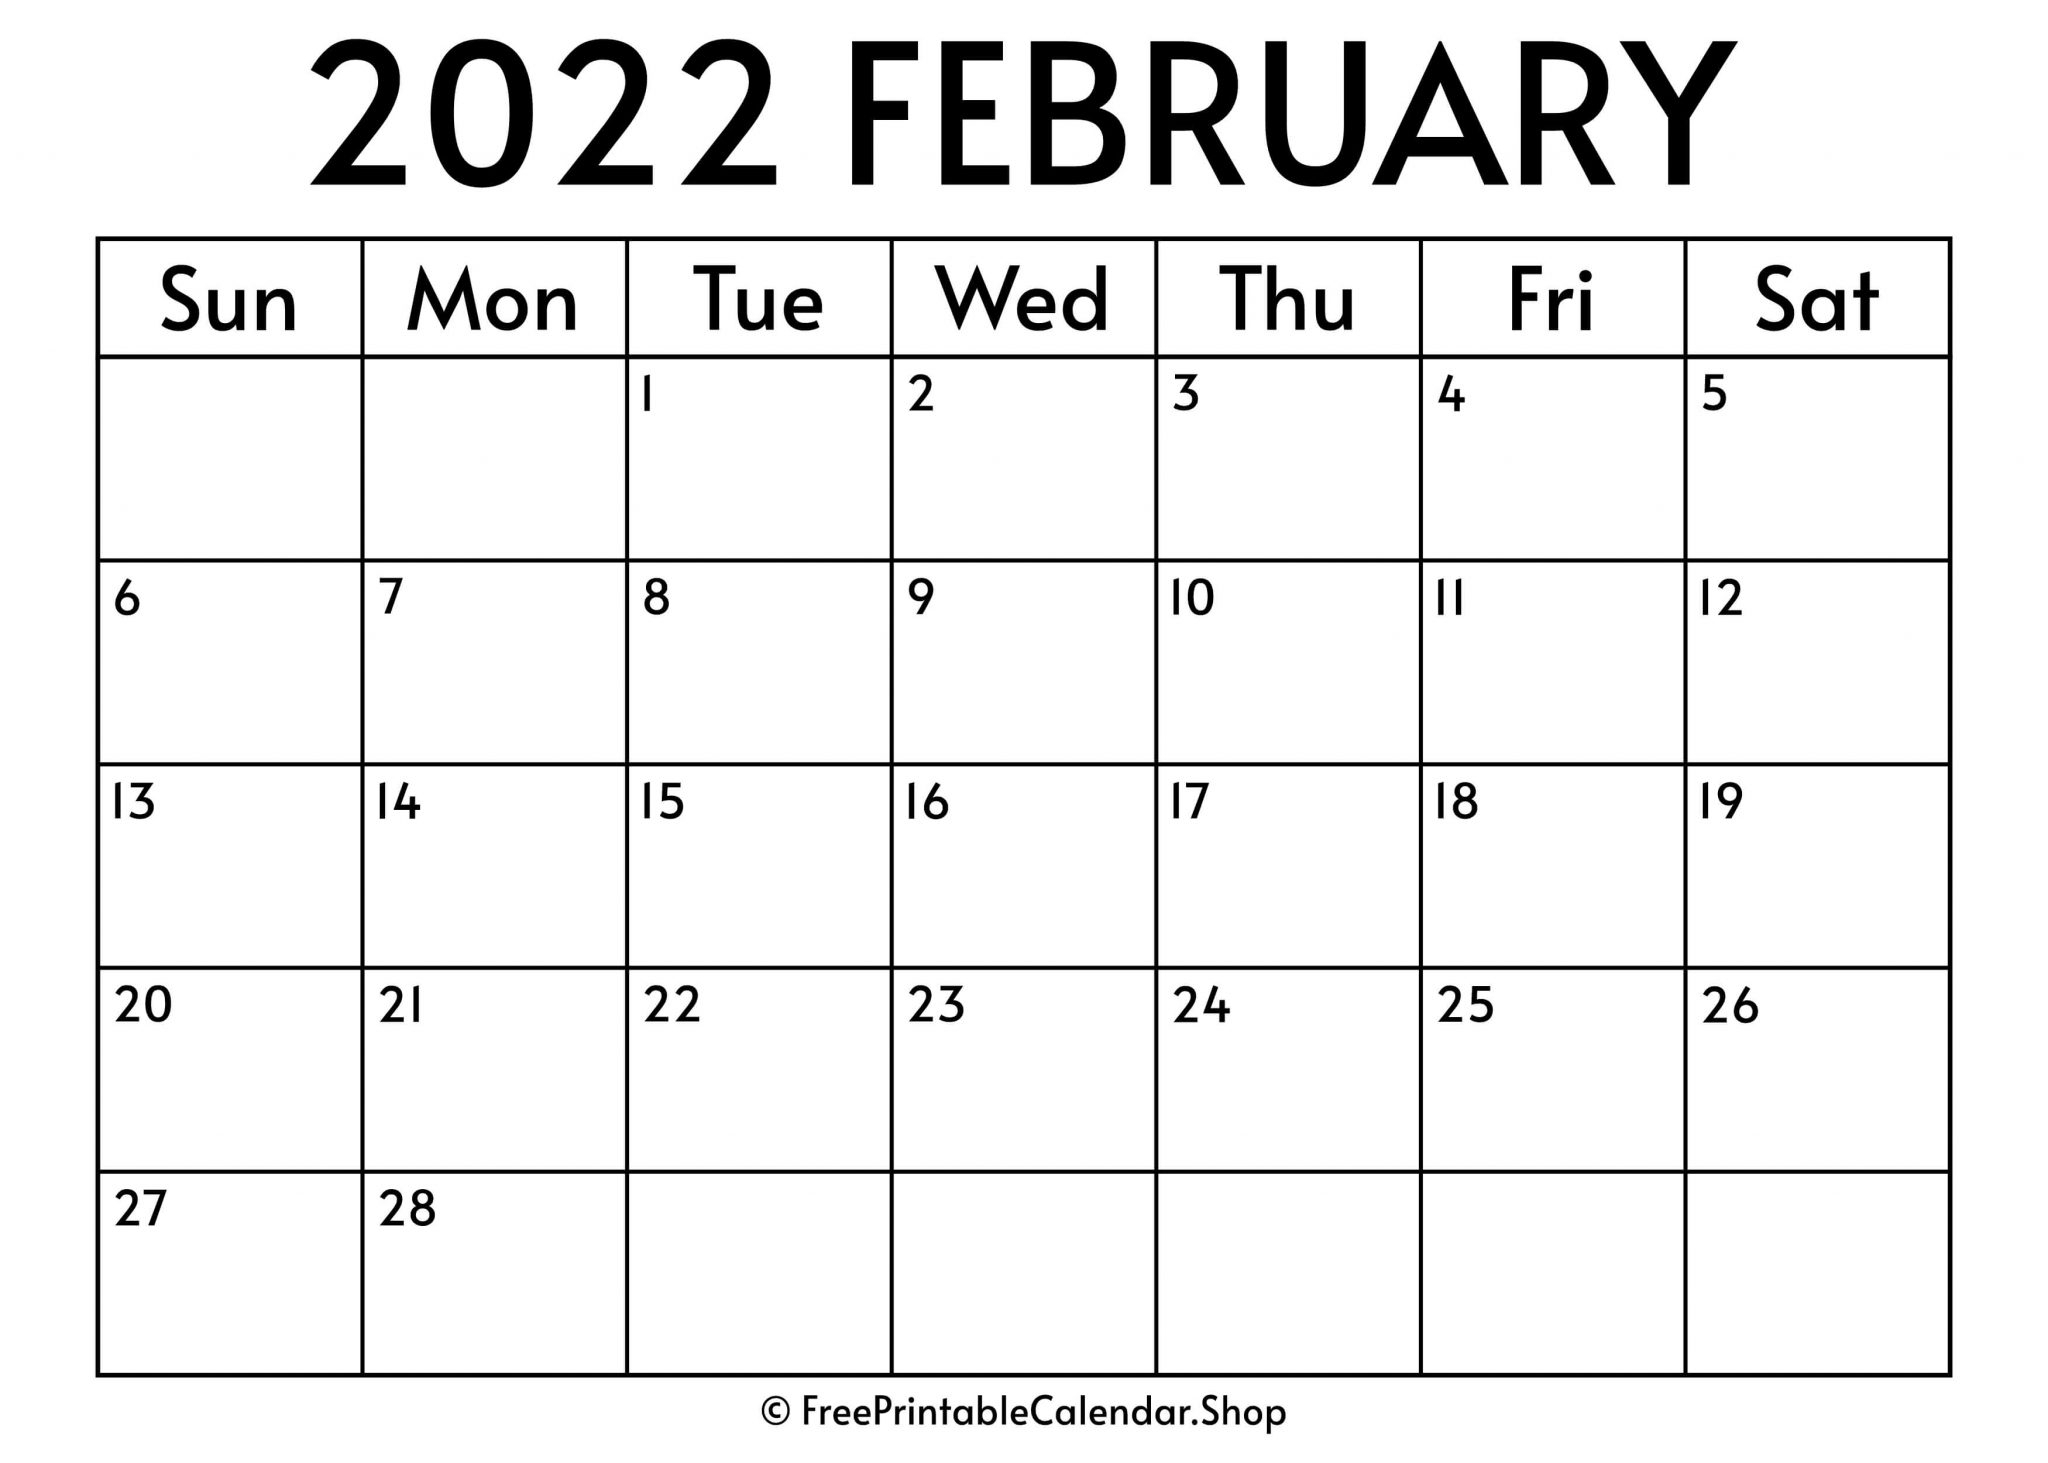 February 2022 Dr Reco